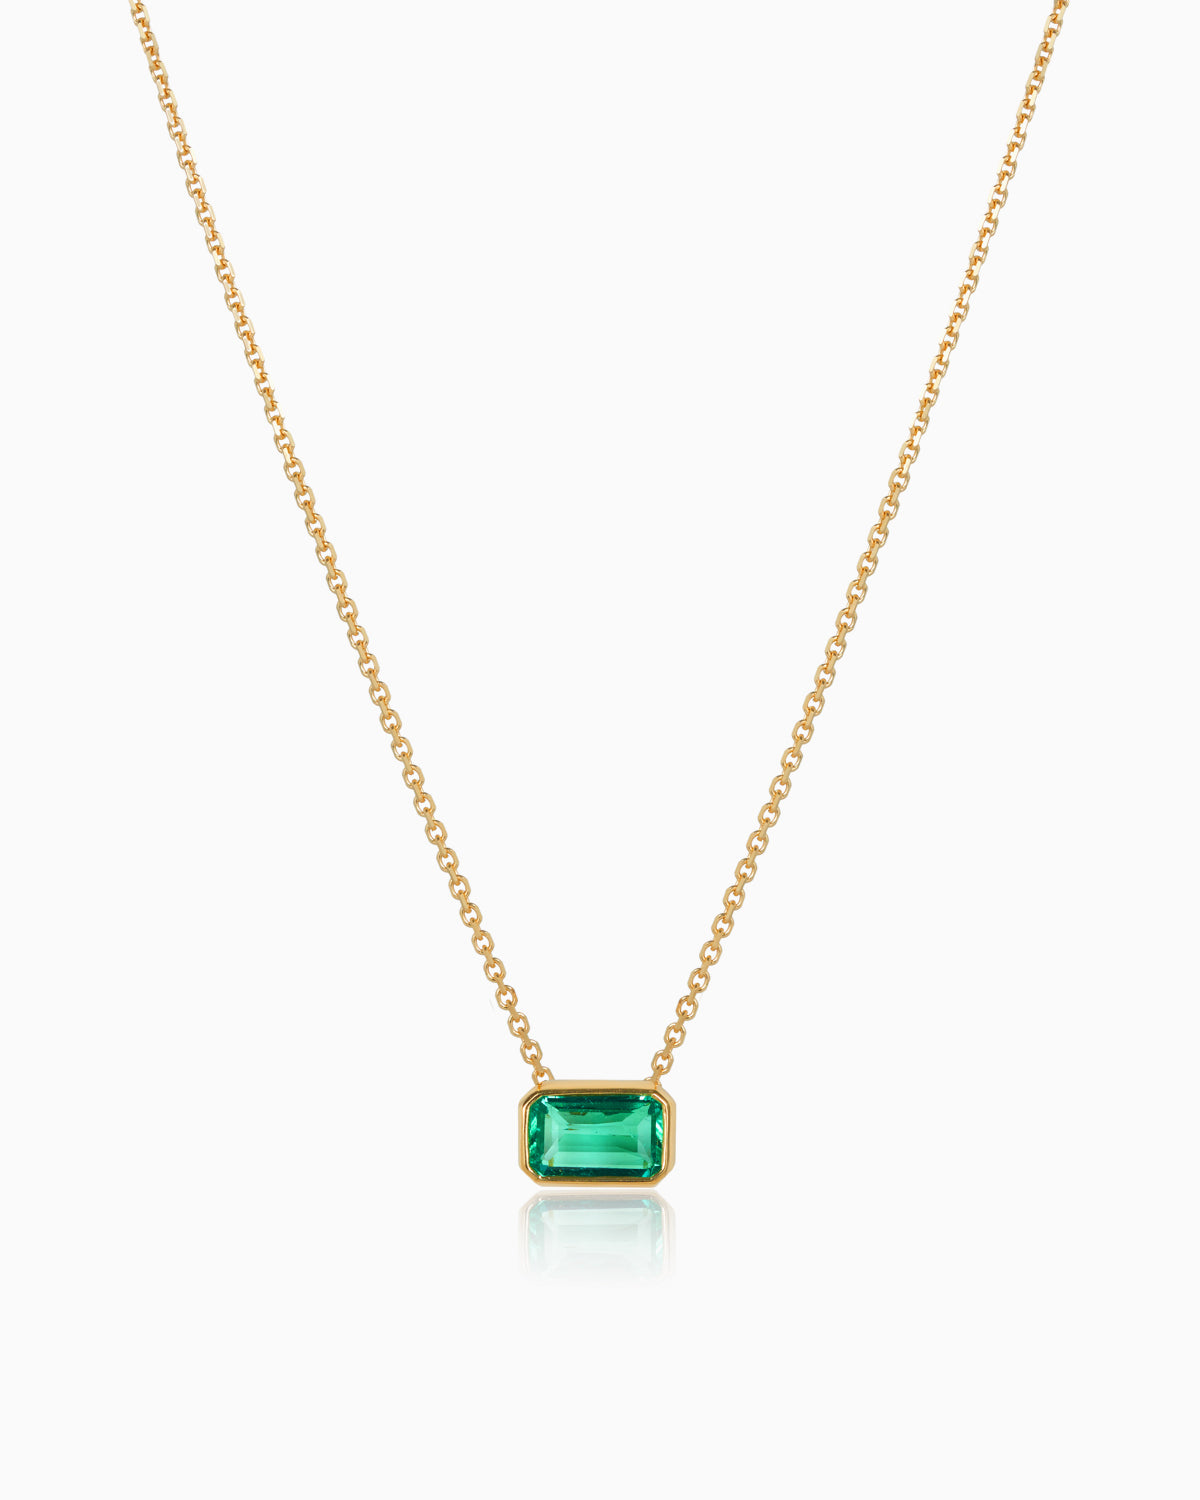 colombian emerald bezel set pendant crafted in 18kyg